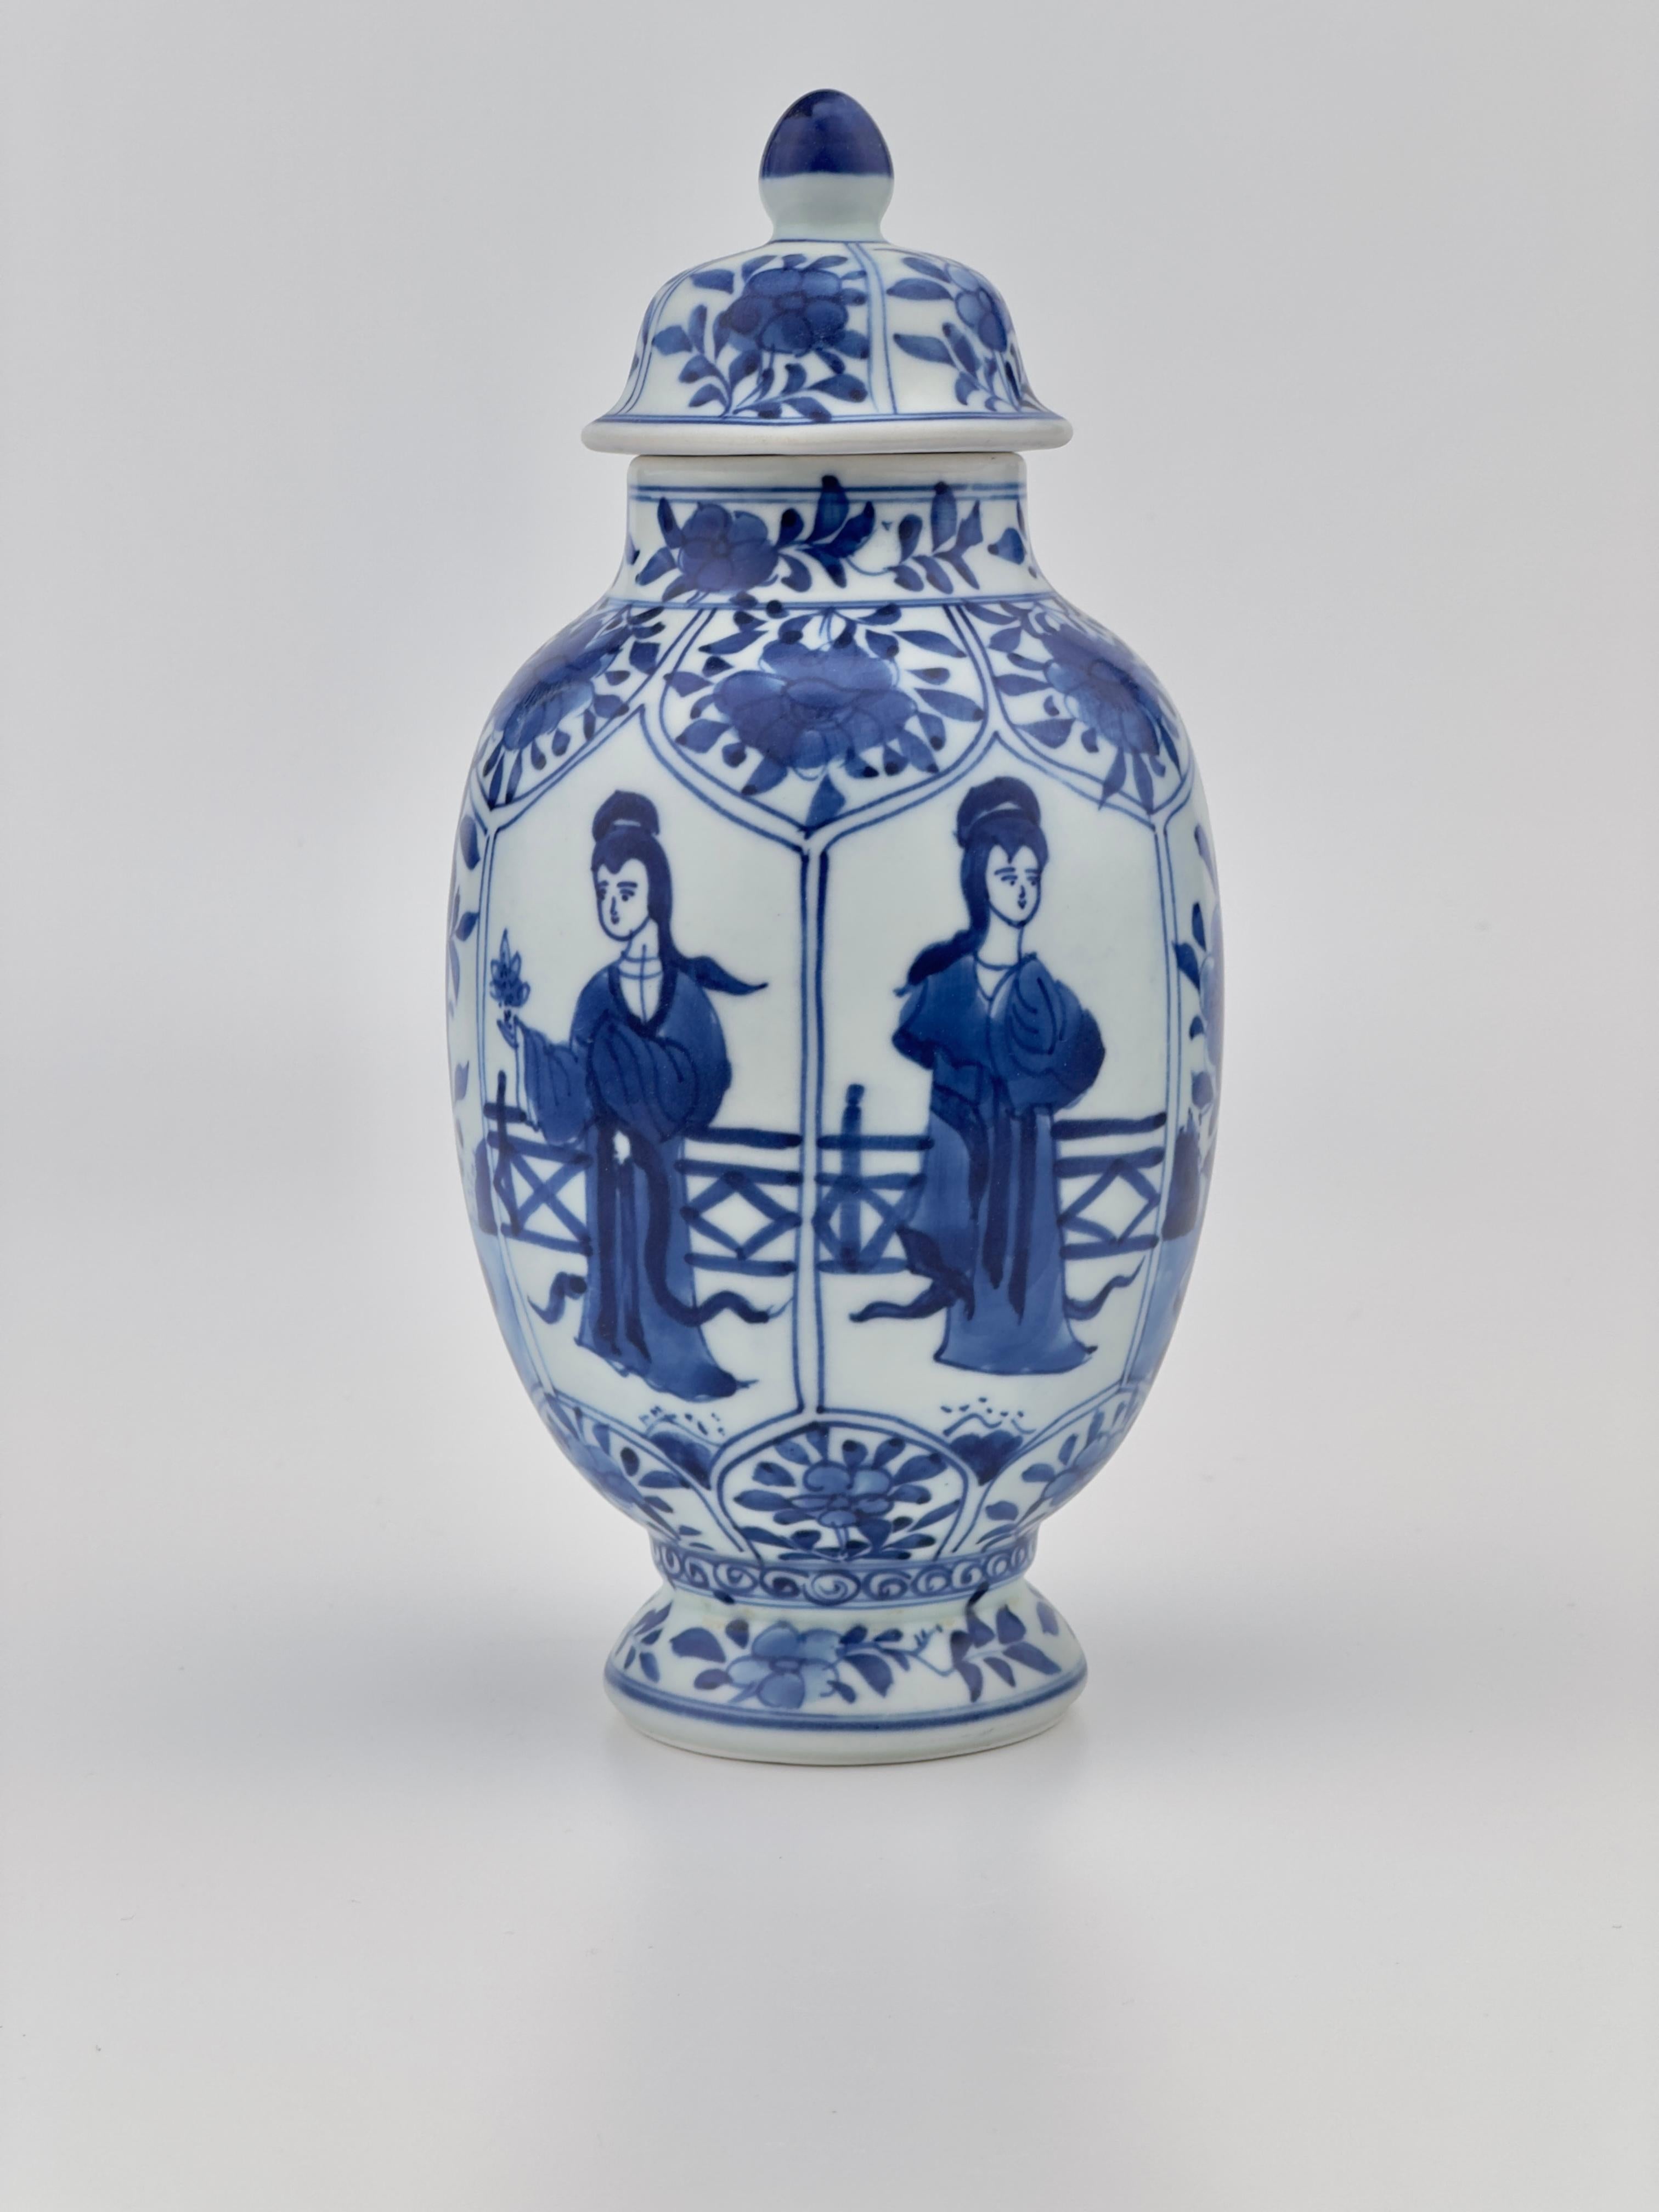 The painting features a typical Kangxi blue and white style depiction of a female figure.

Period : Qing Dynasty, Kangxi reign
Production Date : 1690-1699
Made in : Jingdezhen
Destination : Amsterdam
Found/Acquired : Southeast Asia , South China